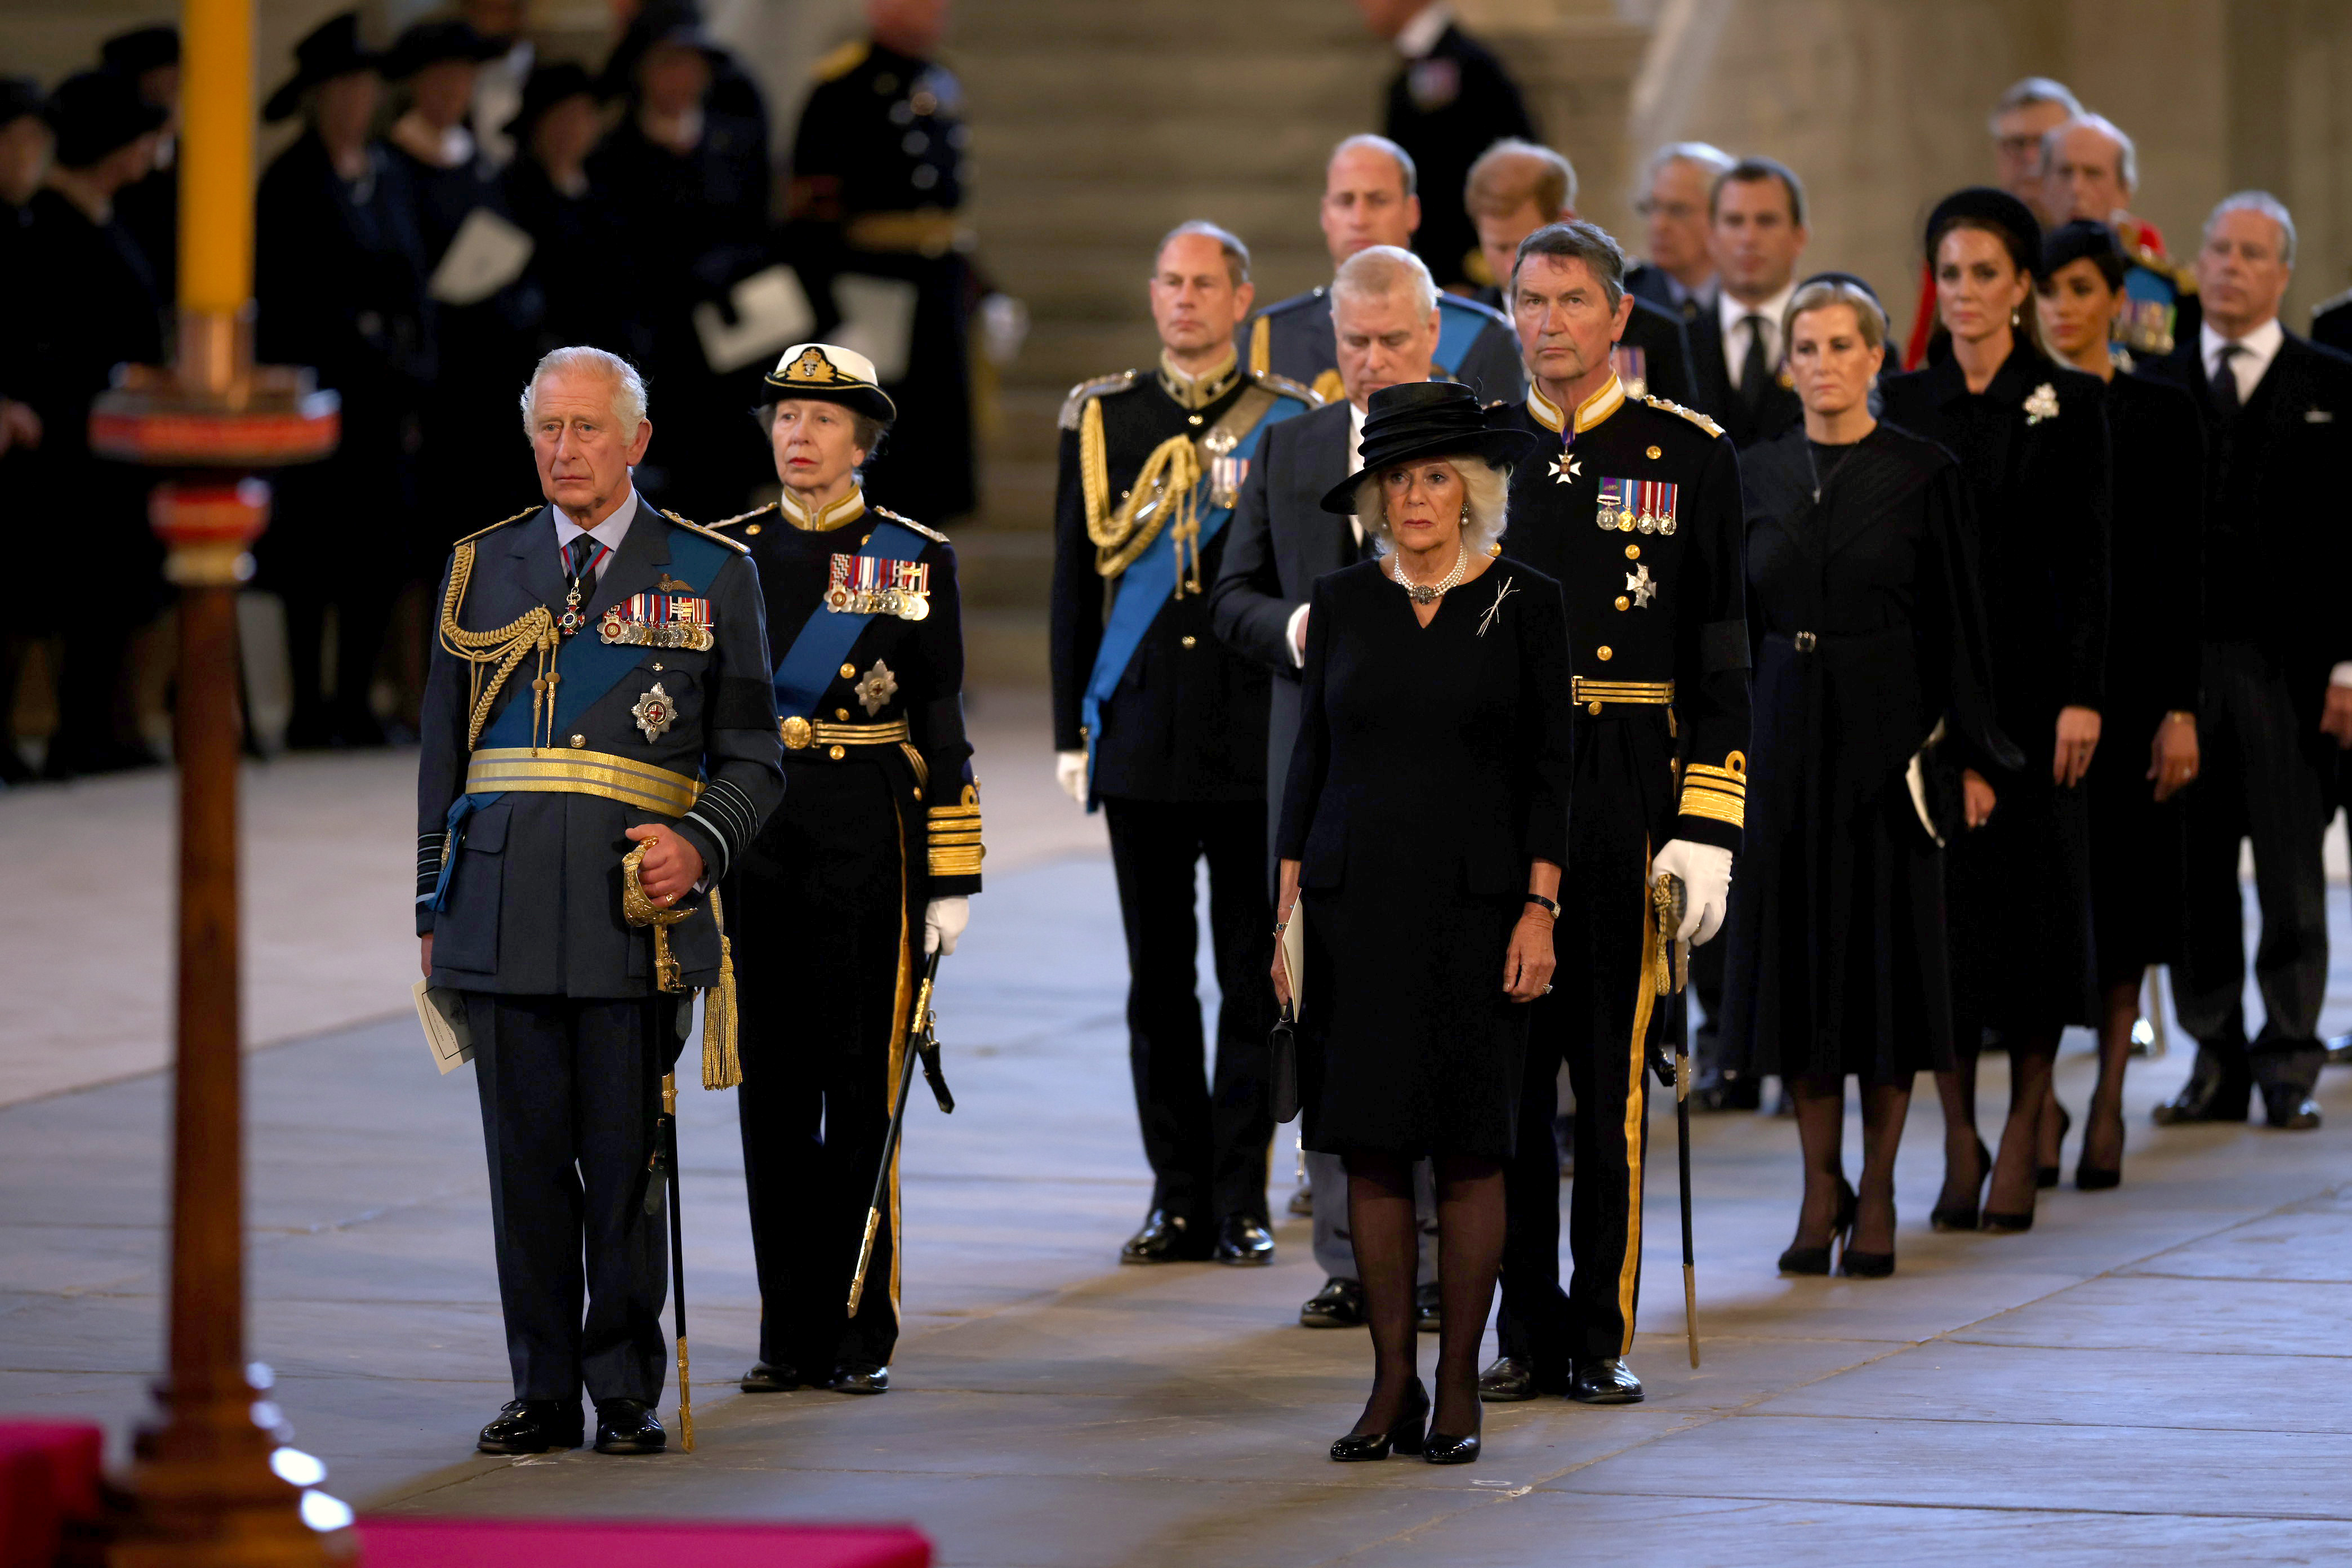 <p>King Charles III, Princess Anne, Prince Edward, <a href="https://www.wonderwall.com/celebrity/profiles/overview/prince-william-482.article">Prince William</a>, Prince Andrew, Camilla, Queen Consort, Sir Timothy Laurence, Peter Phillips, Sophie, Countess of Wessex, Princess Kate, Princess Beatrice and Prince Edward, Duke of Kent were in formation inside the Palace of Westminster in London at the start of the lying-in state of Queen Elizabeth II on Sept. 14, 2022.</p>